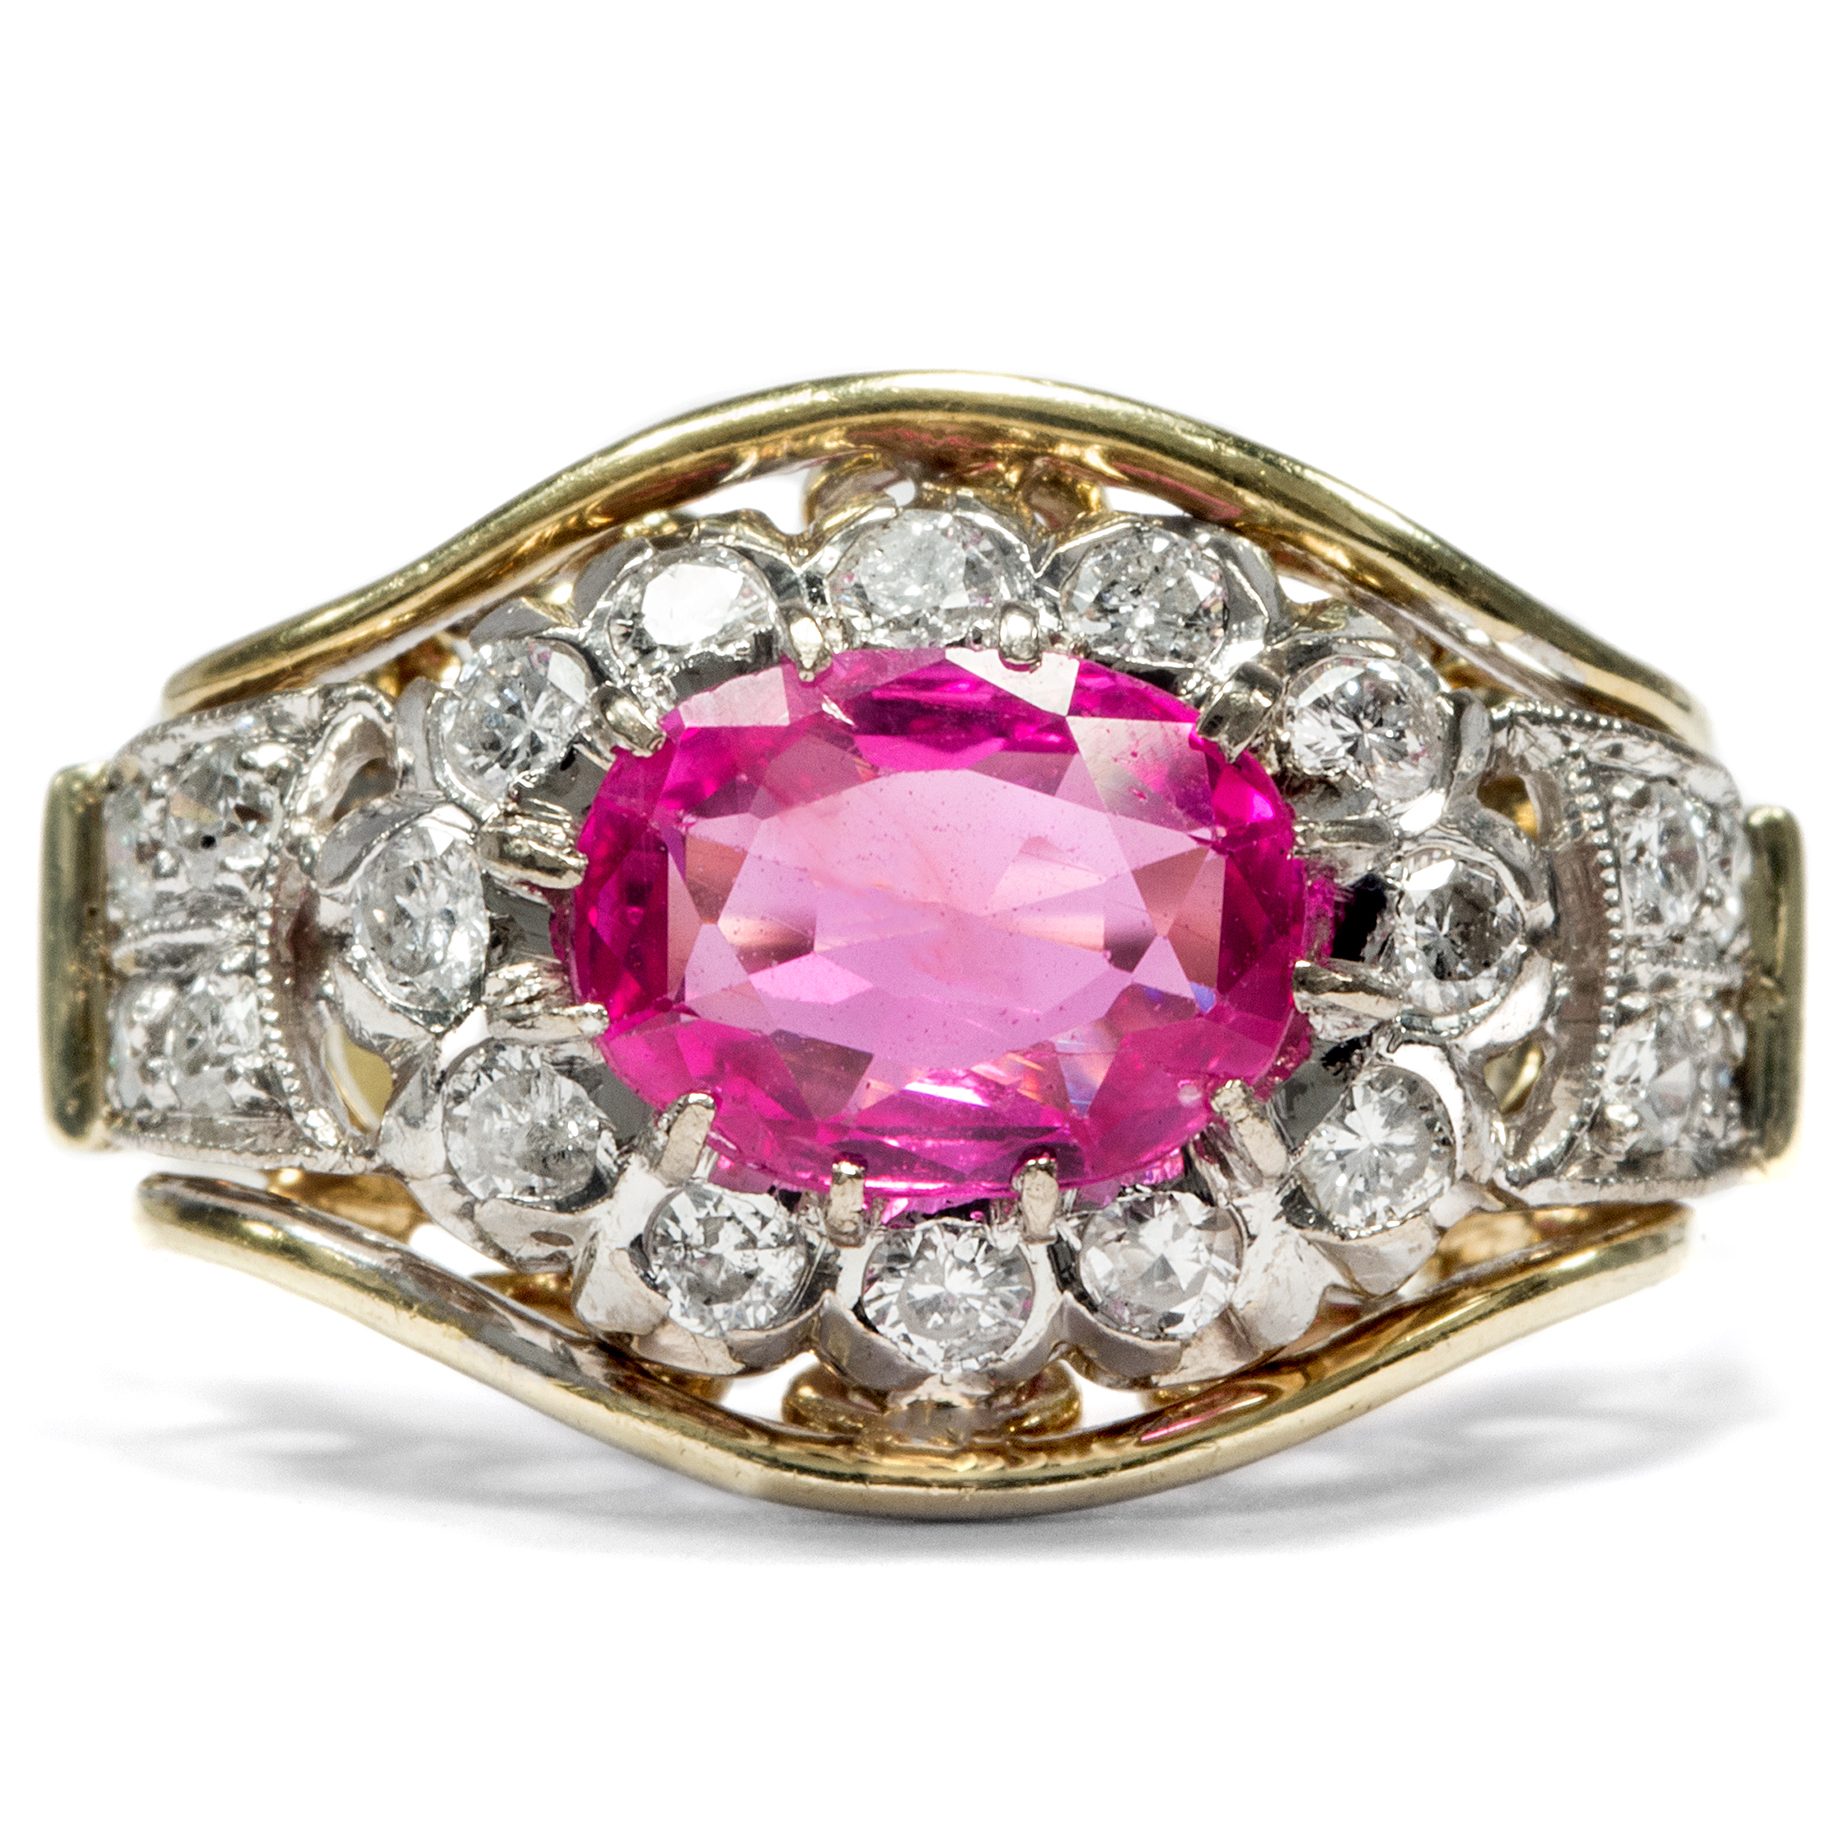 Magnificent Ring with Untreated Burma Pink Sapphire & Diamonds, c. 1955